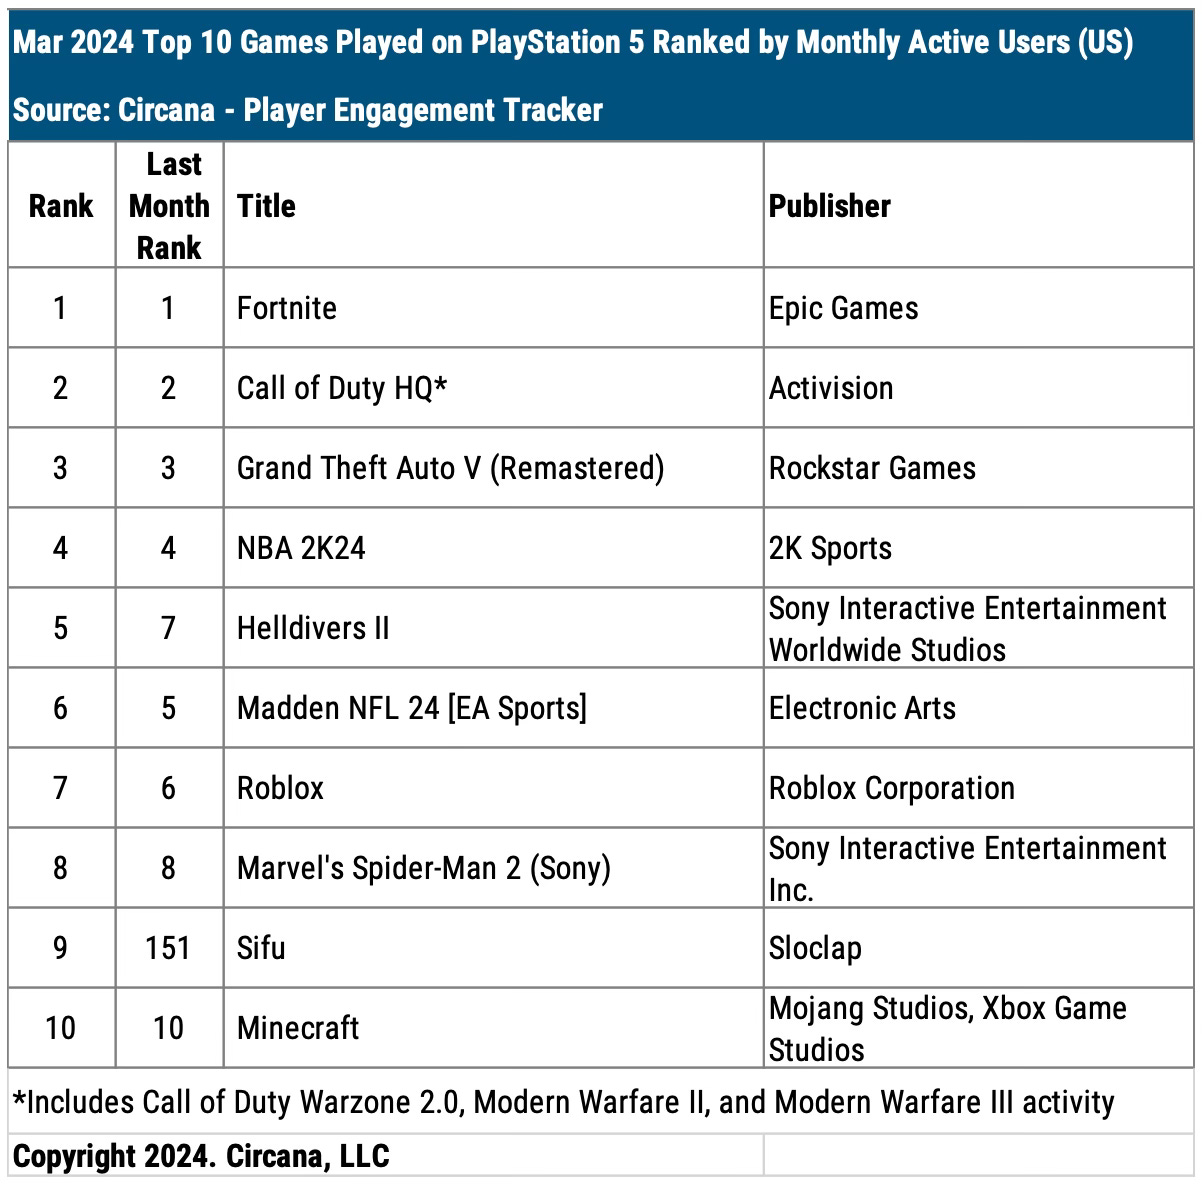 Chart showing the top 10 games played on PlayStation 5 in March 2024 when ranked by monthly active users in the U.S.